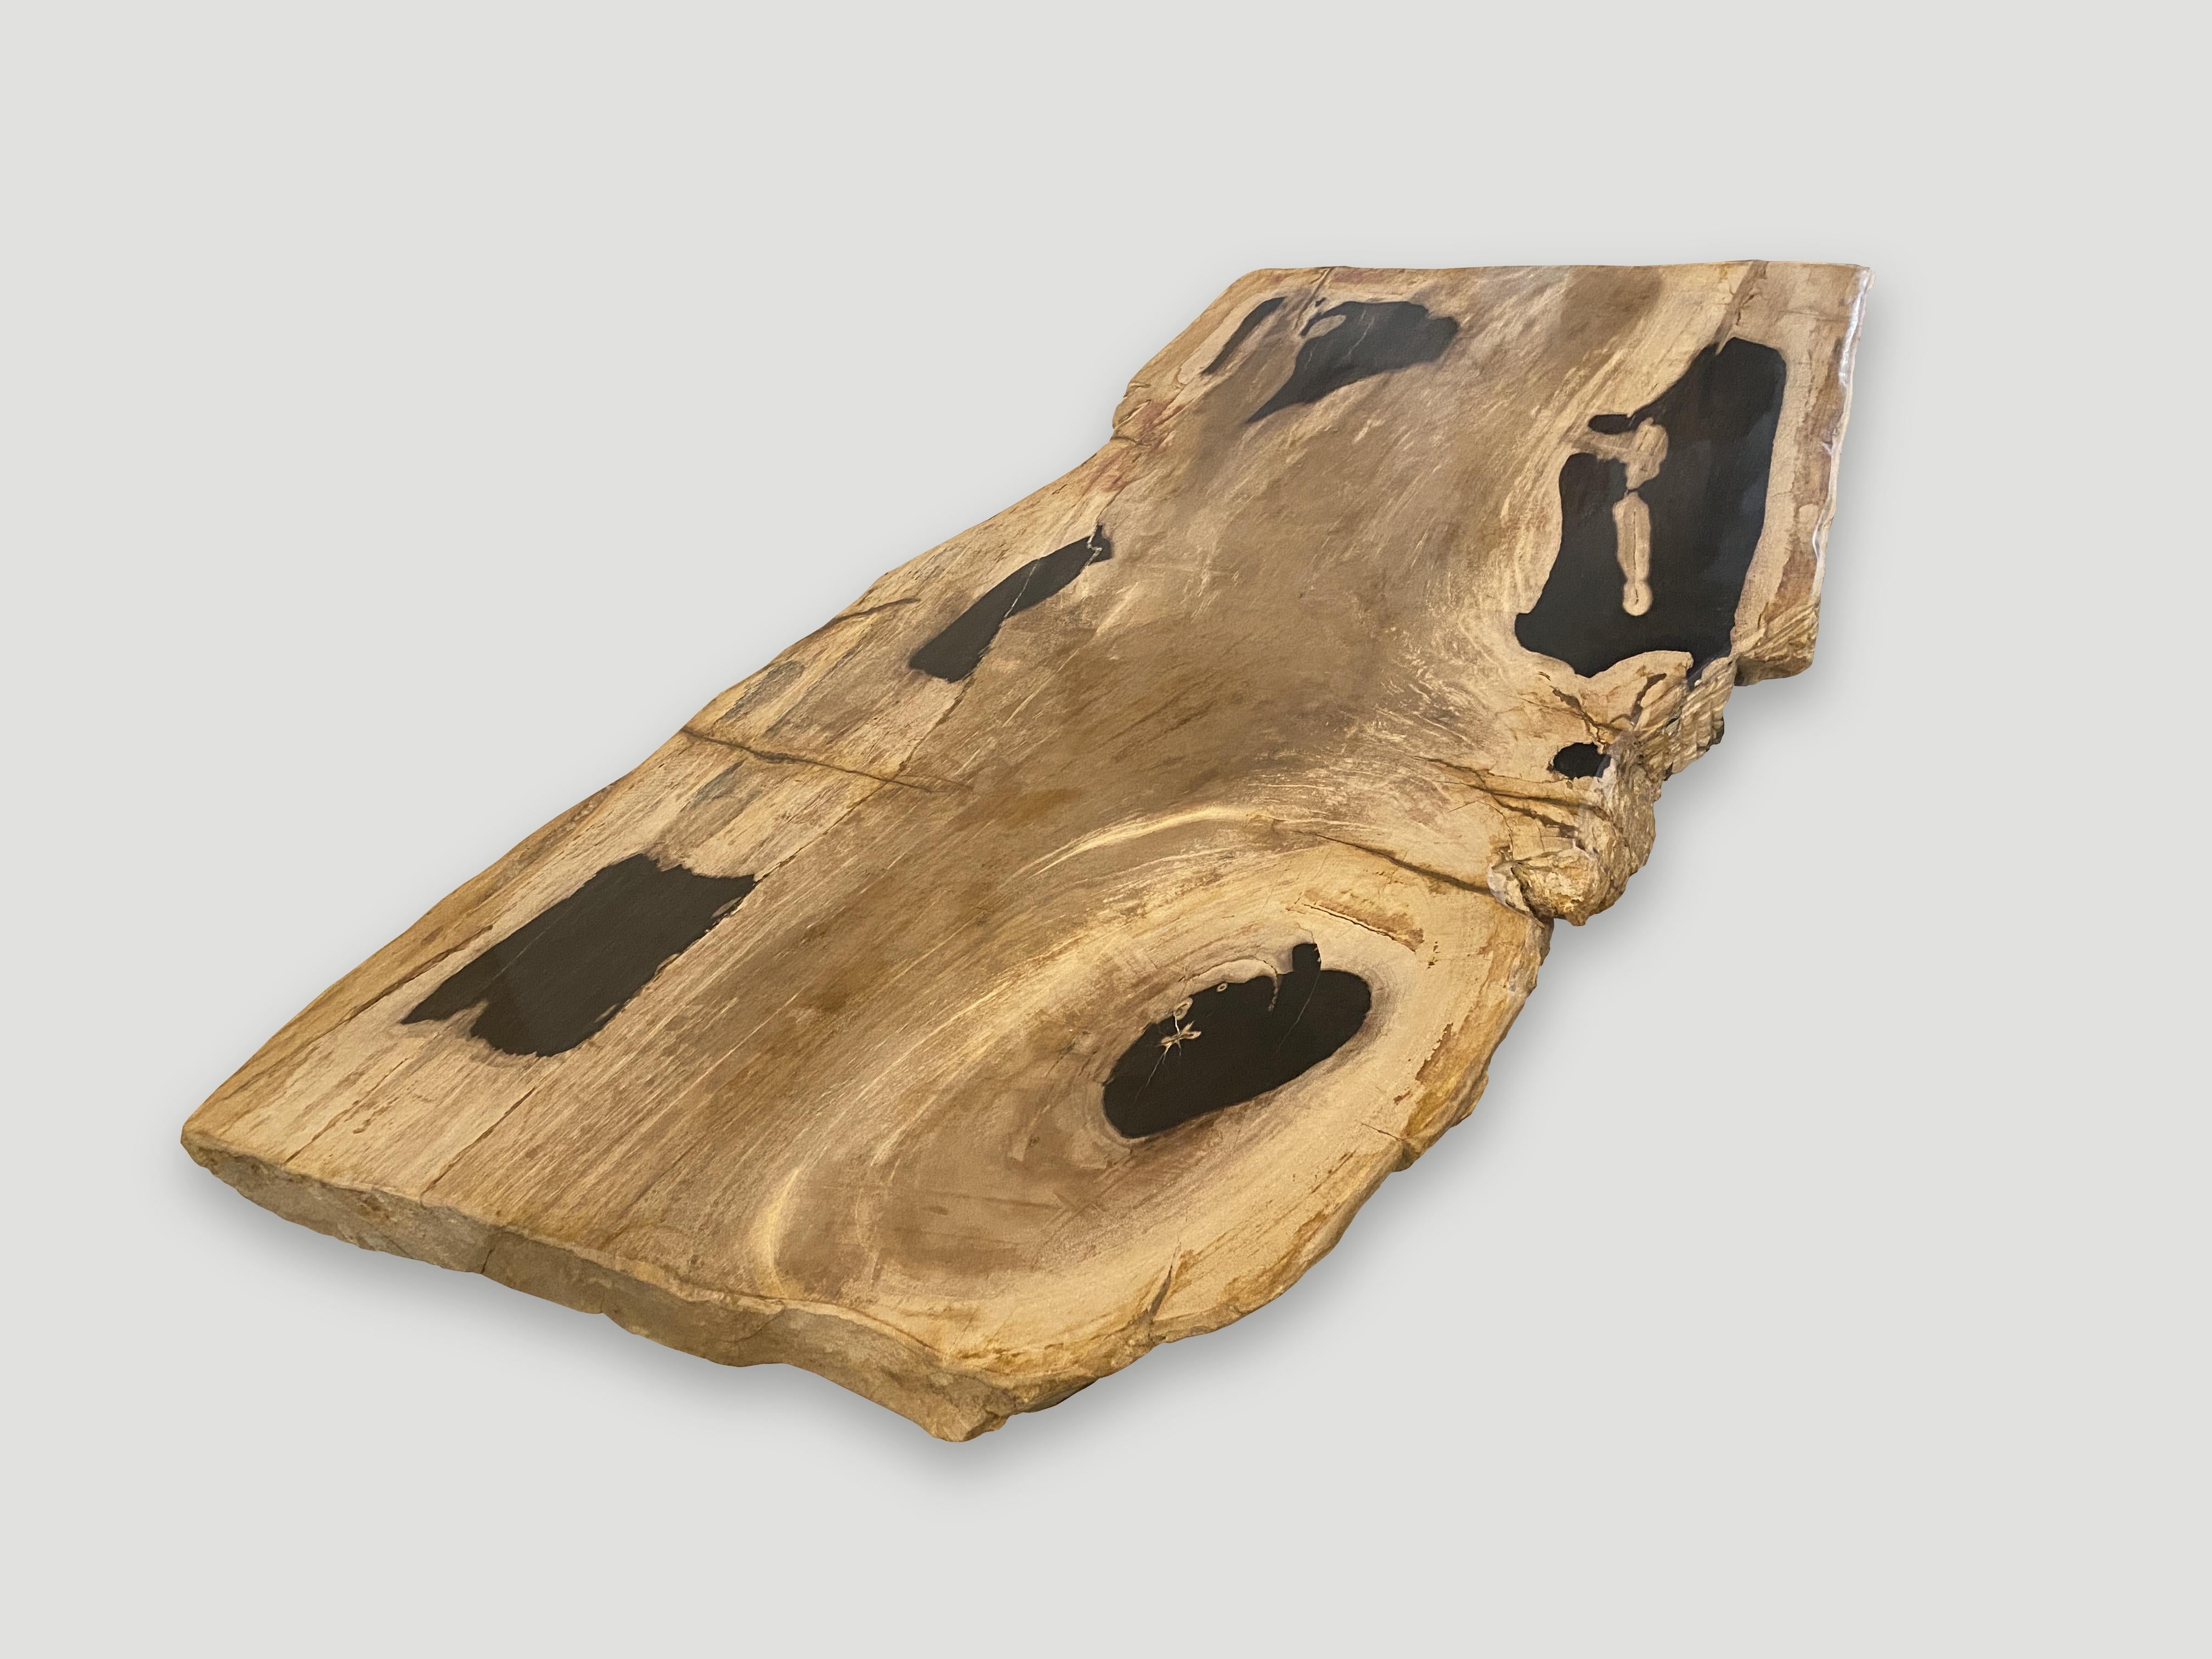 Impressive live edge single slab petrified wood with beautiful natural markings and contrasting color tones. This can be made into a coffee table, console or desk. The live edge is 23- 25